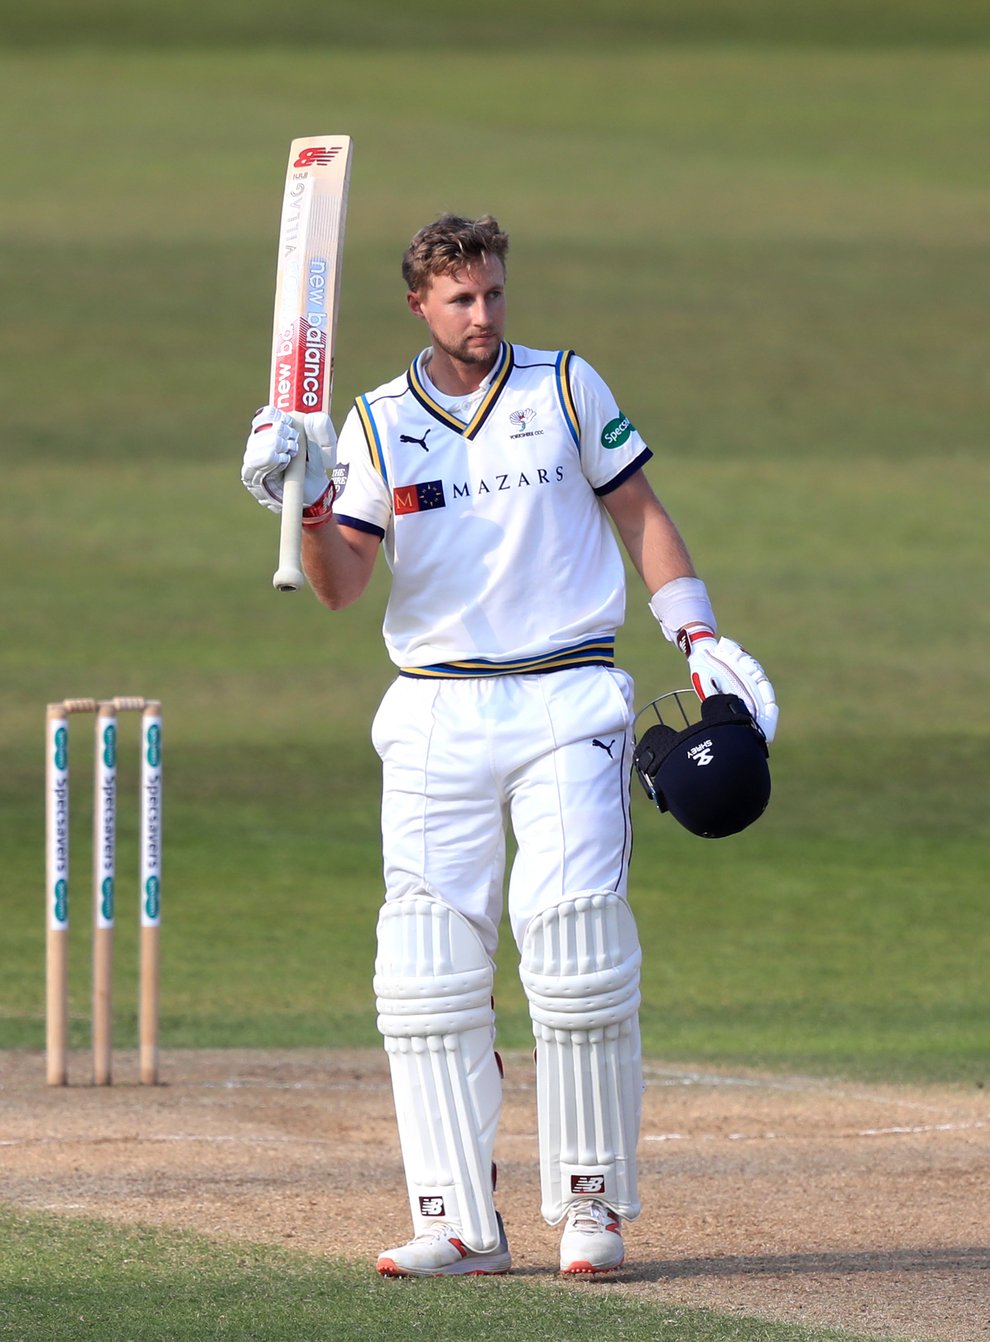 Joe Root boosted Yorkshire’s chances of drawing their match against Lancashire (Simon Cooper/PA)